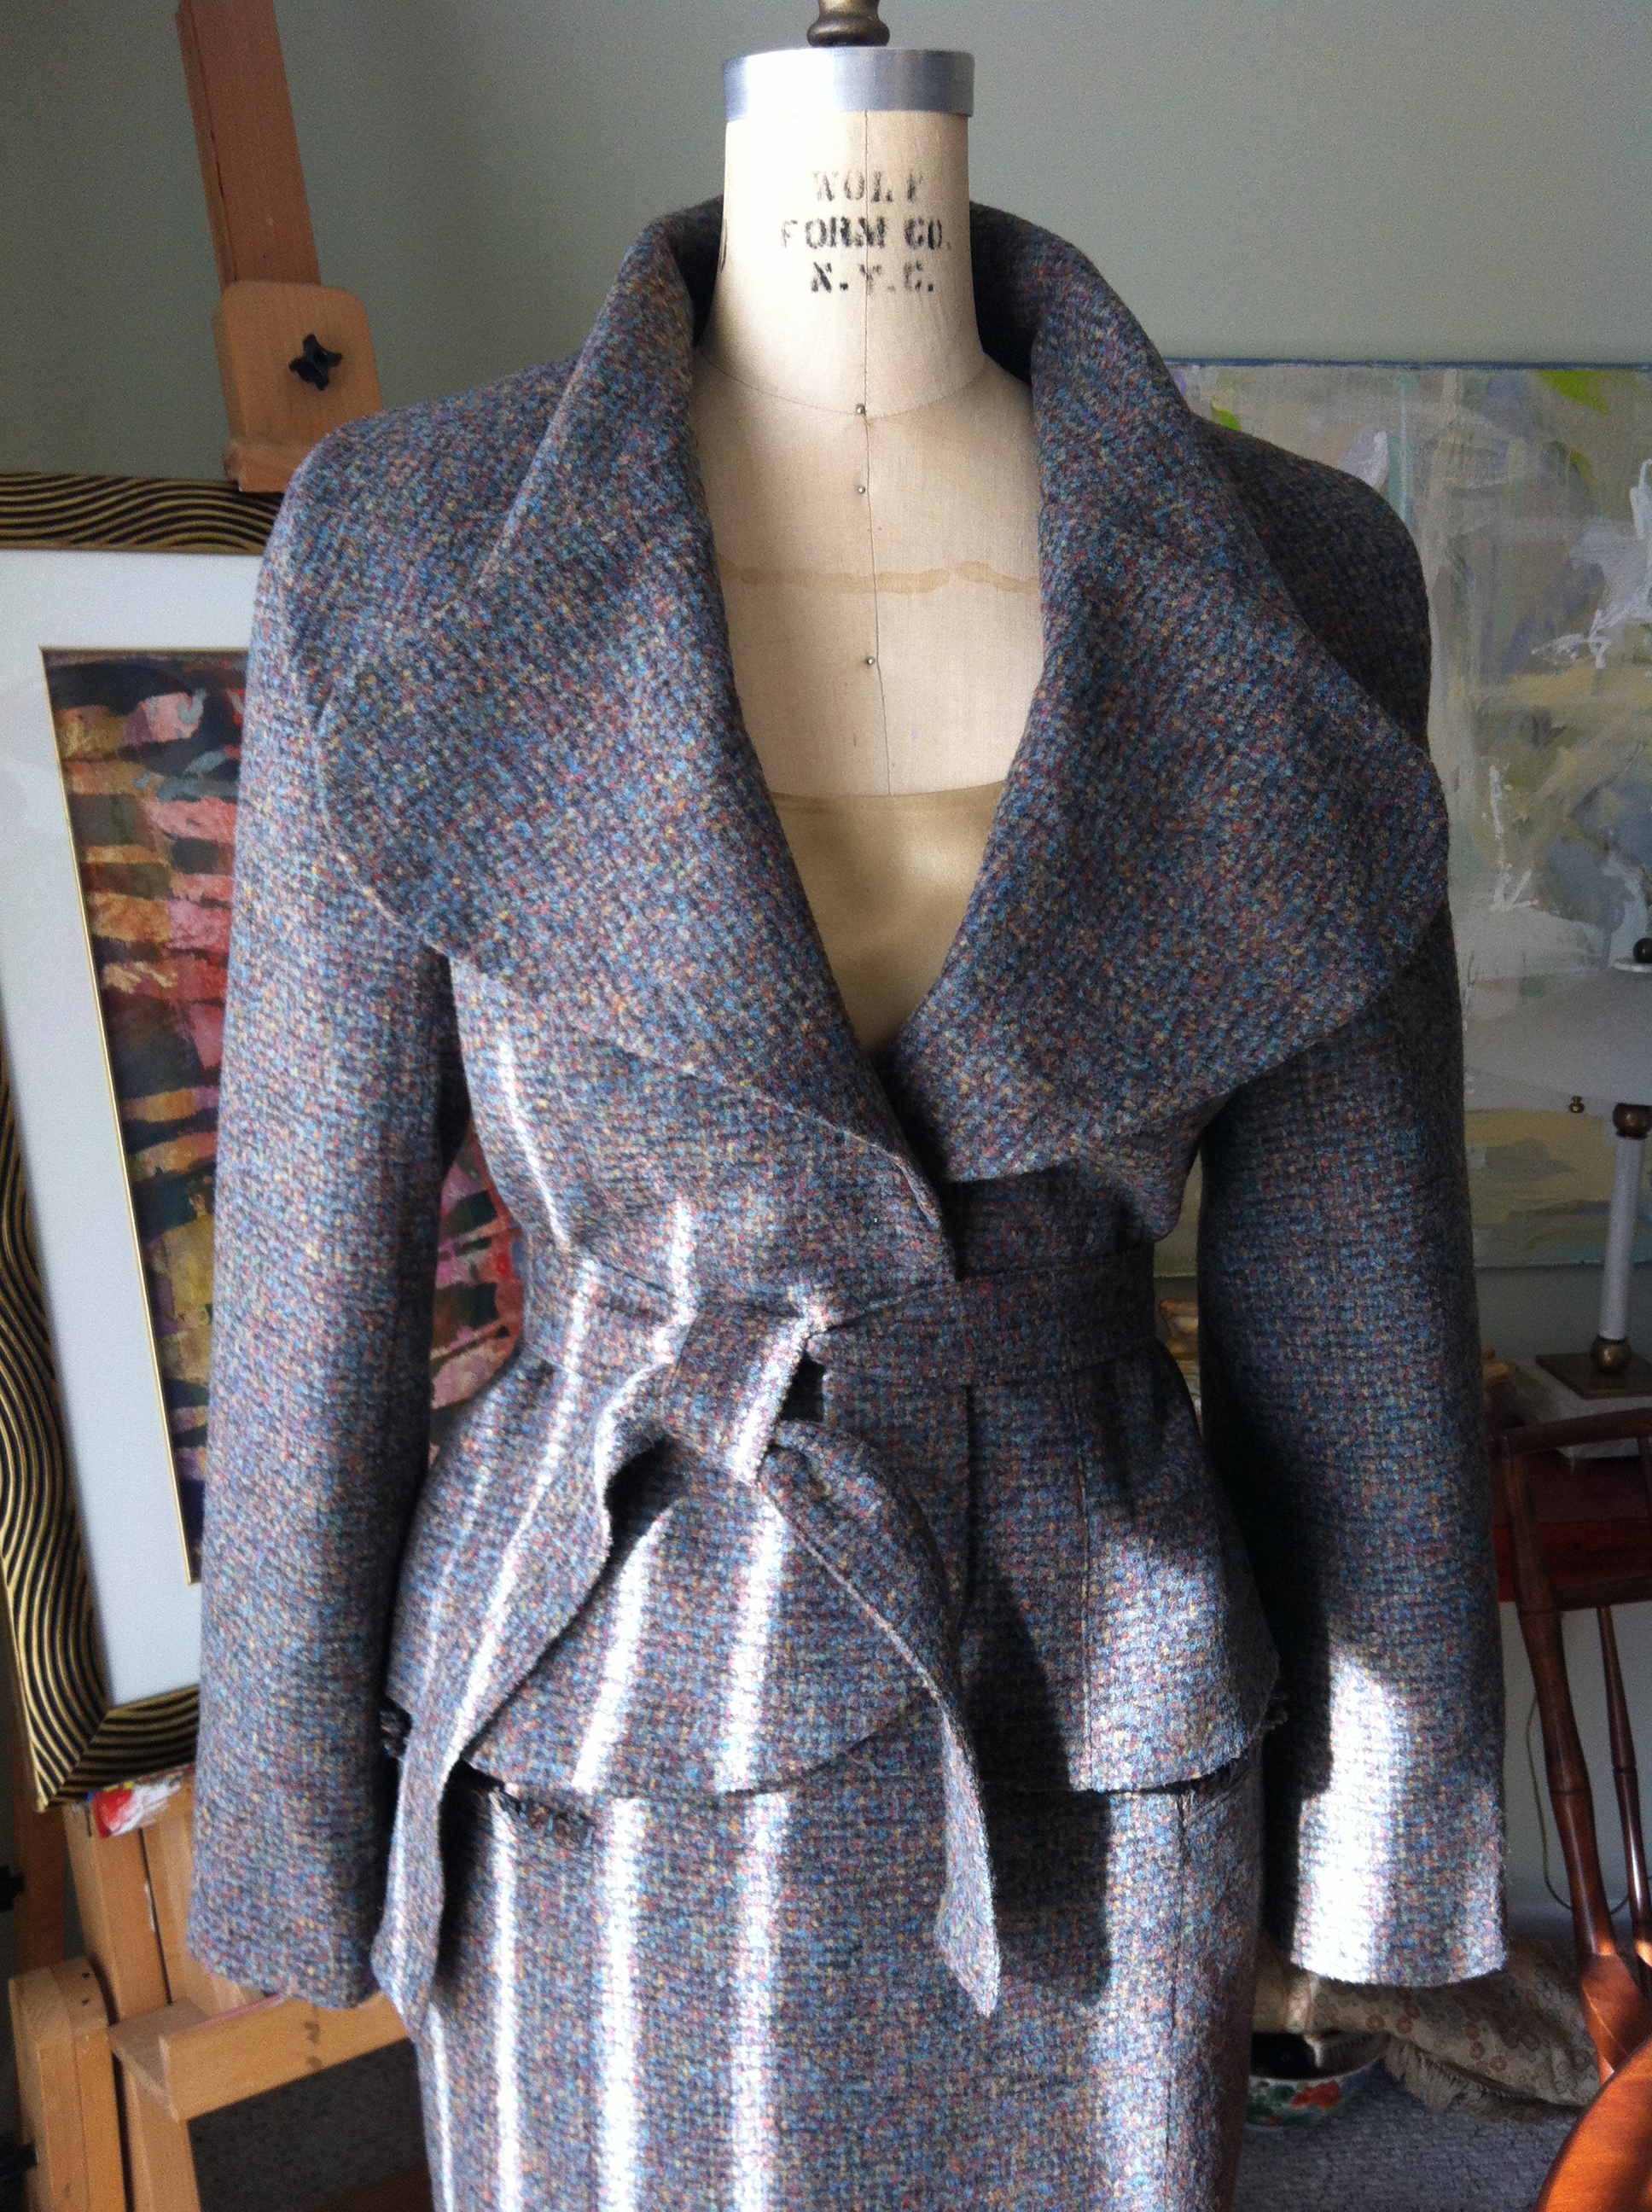 City Suit-jacket – Sewing Projects | BurdaStyle.com